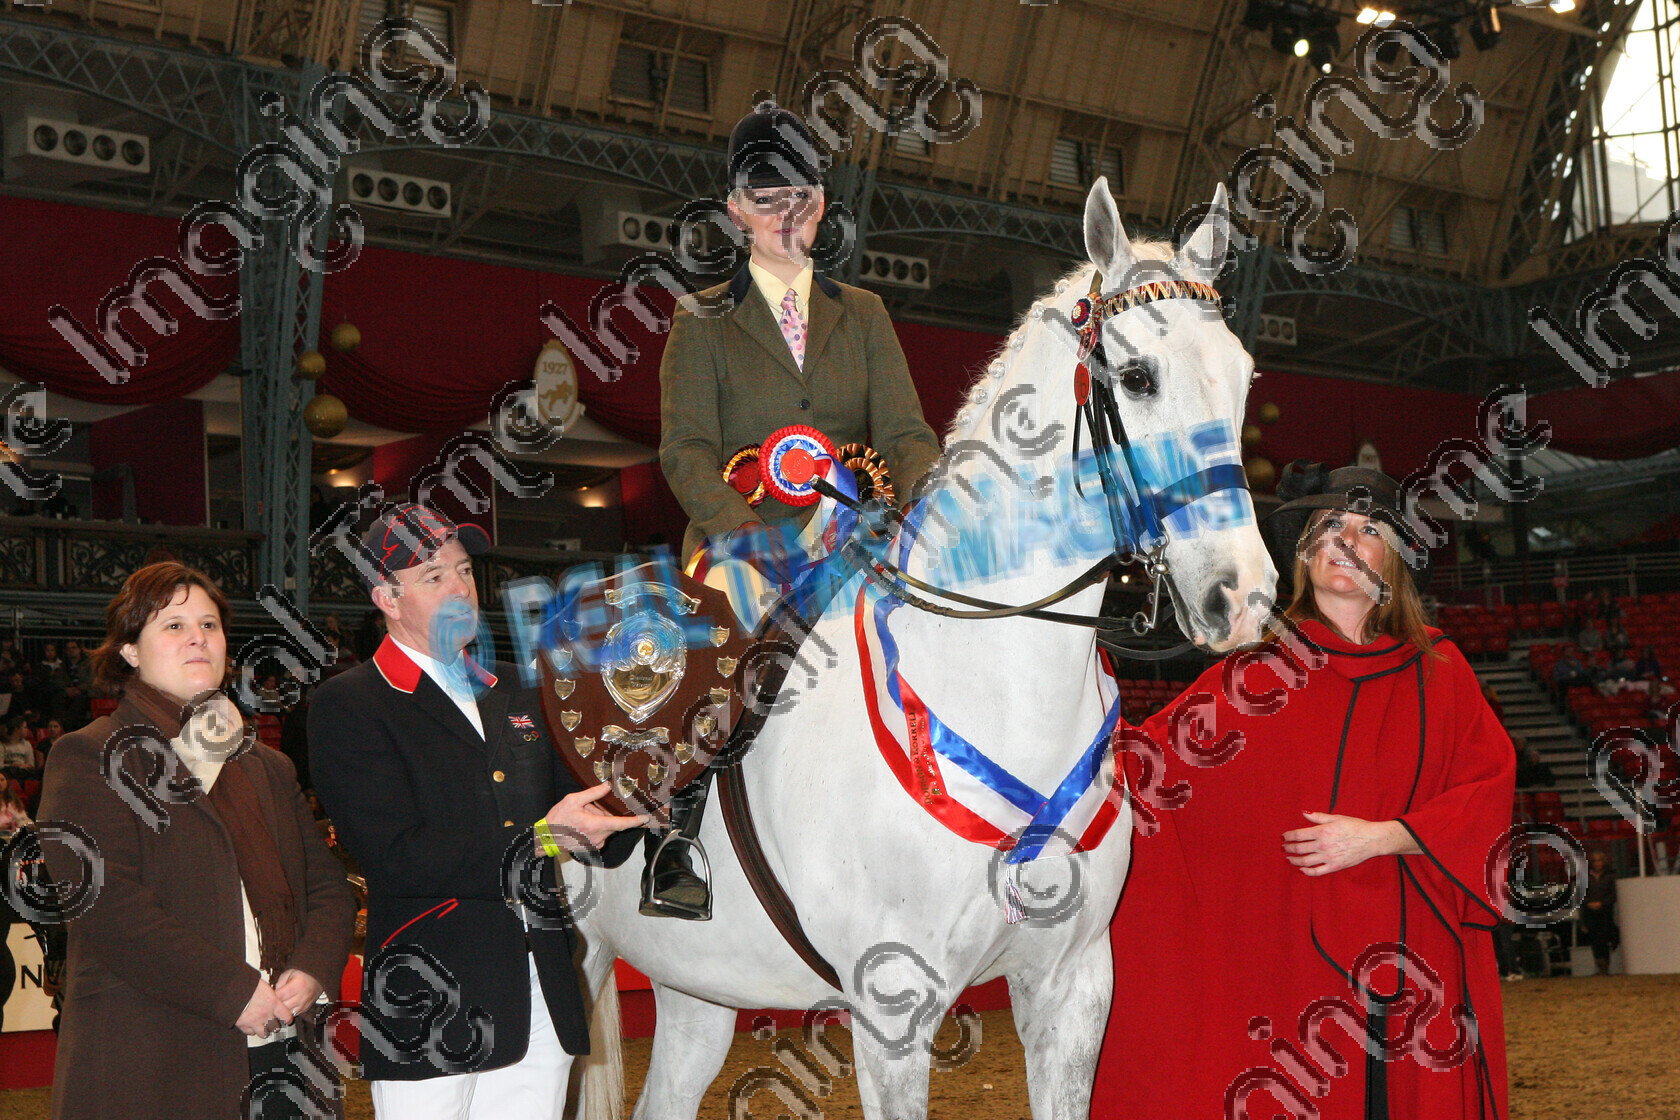 S07-73-02-130 
 Keywords: Friday, 21 December, 2007, The London International Horse Show, Olympia, UK, The Veteran Horse Society, Supreme, Championship, indoors, view landscape, 189, BOWLANDS DIPLOMAT, 1st first, Champion, winner win won, `Rider: , Gill Bayley-Machin, 16 Years Old, grey gray, white, Rosette, sash, presentation, stand, plaque, trophy, 'Presented By: , brow band, Rebecca Ingram (Dodson & Horrell), John Whittaker, Julianne Aston (VHS Founder)